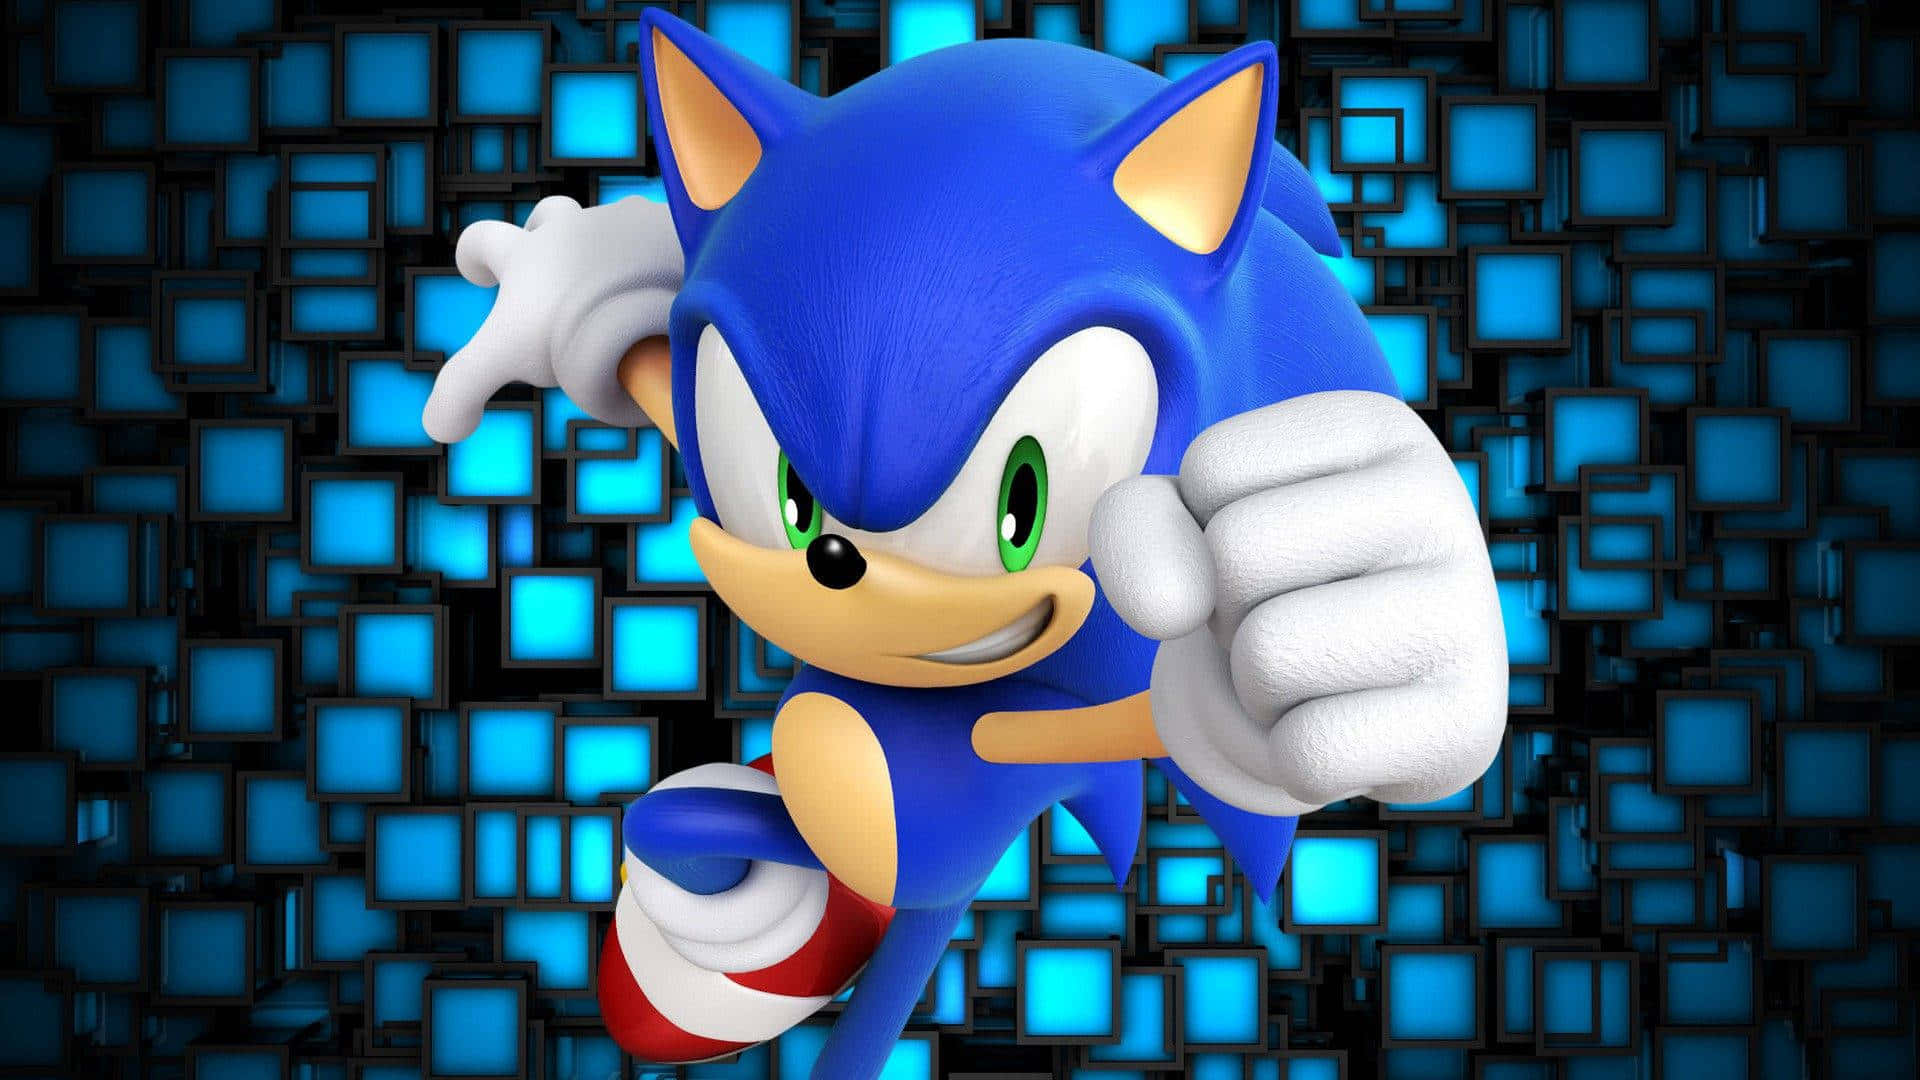 Blast into the Future with Sonic the Hedgehog!